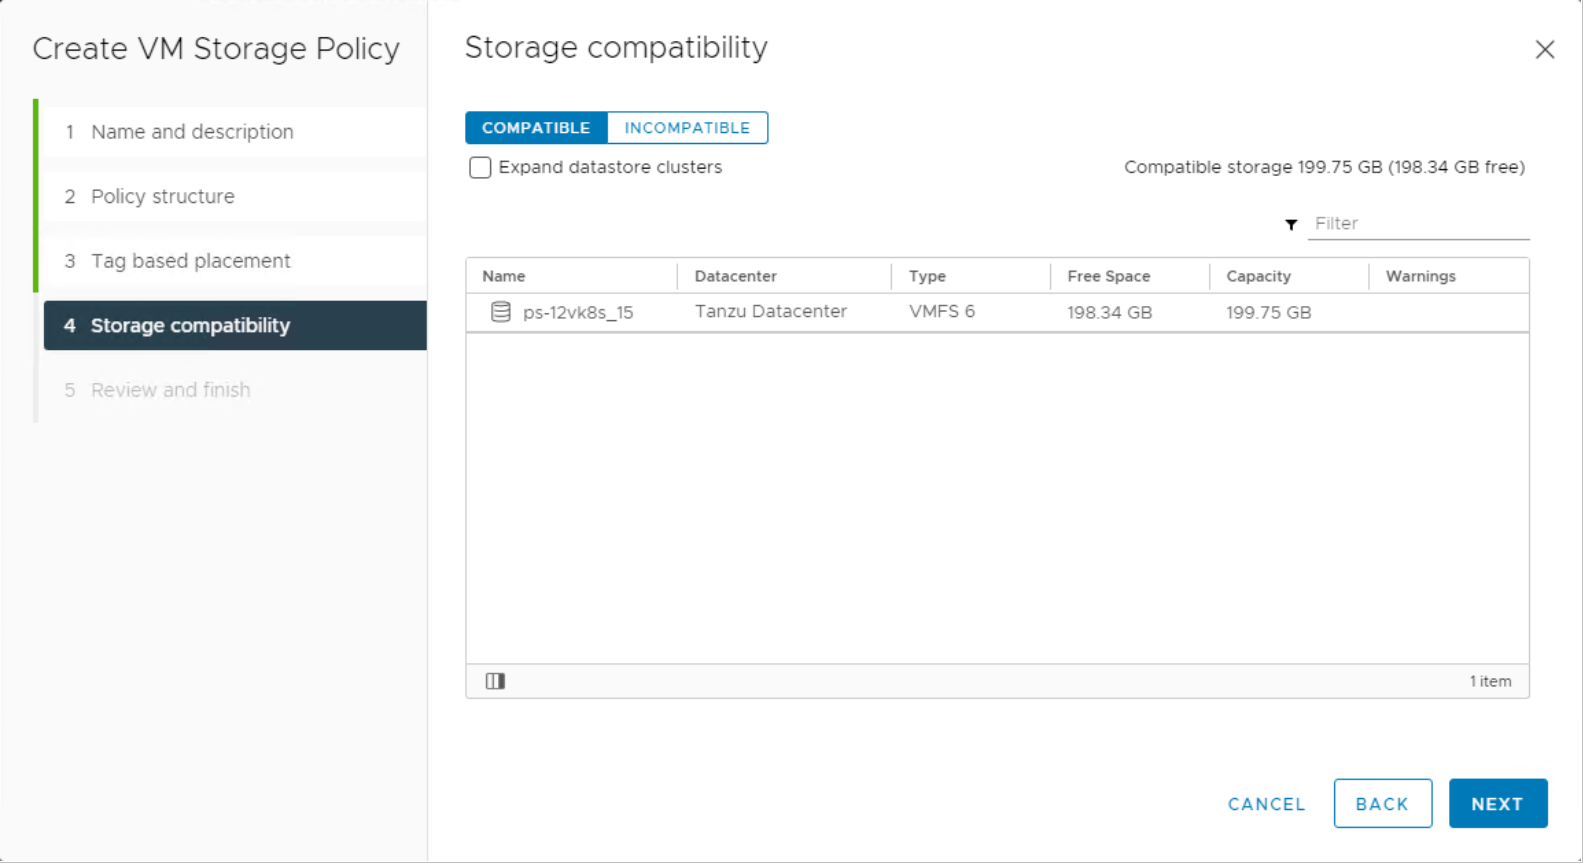 vSphere Client create VM Storage Policy workflow. Storage compatibility shows ps-12vk8s_15 datastore is compatible.